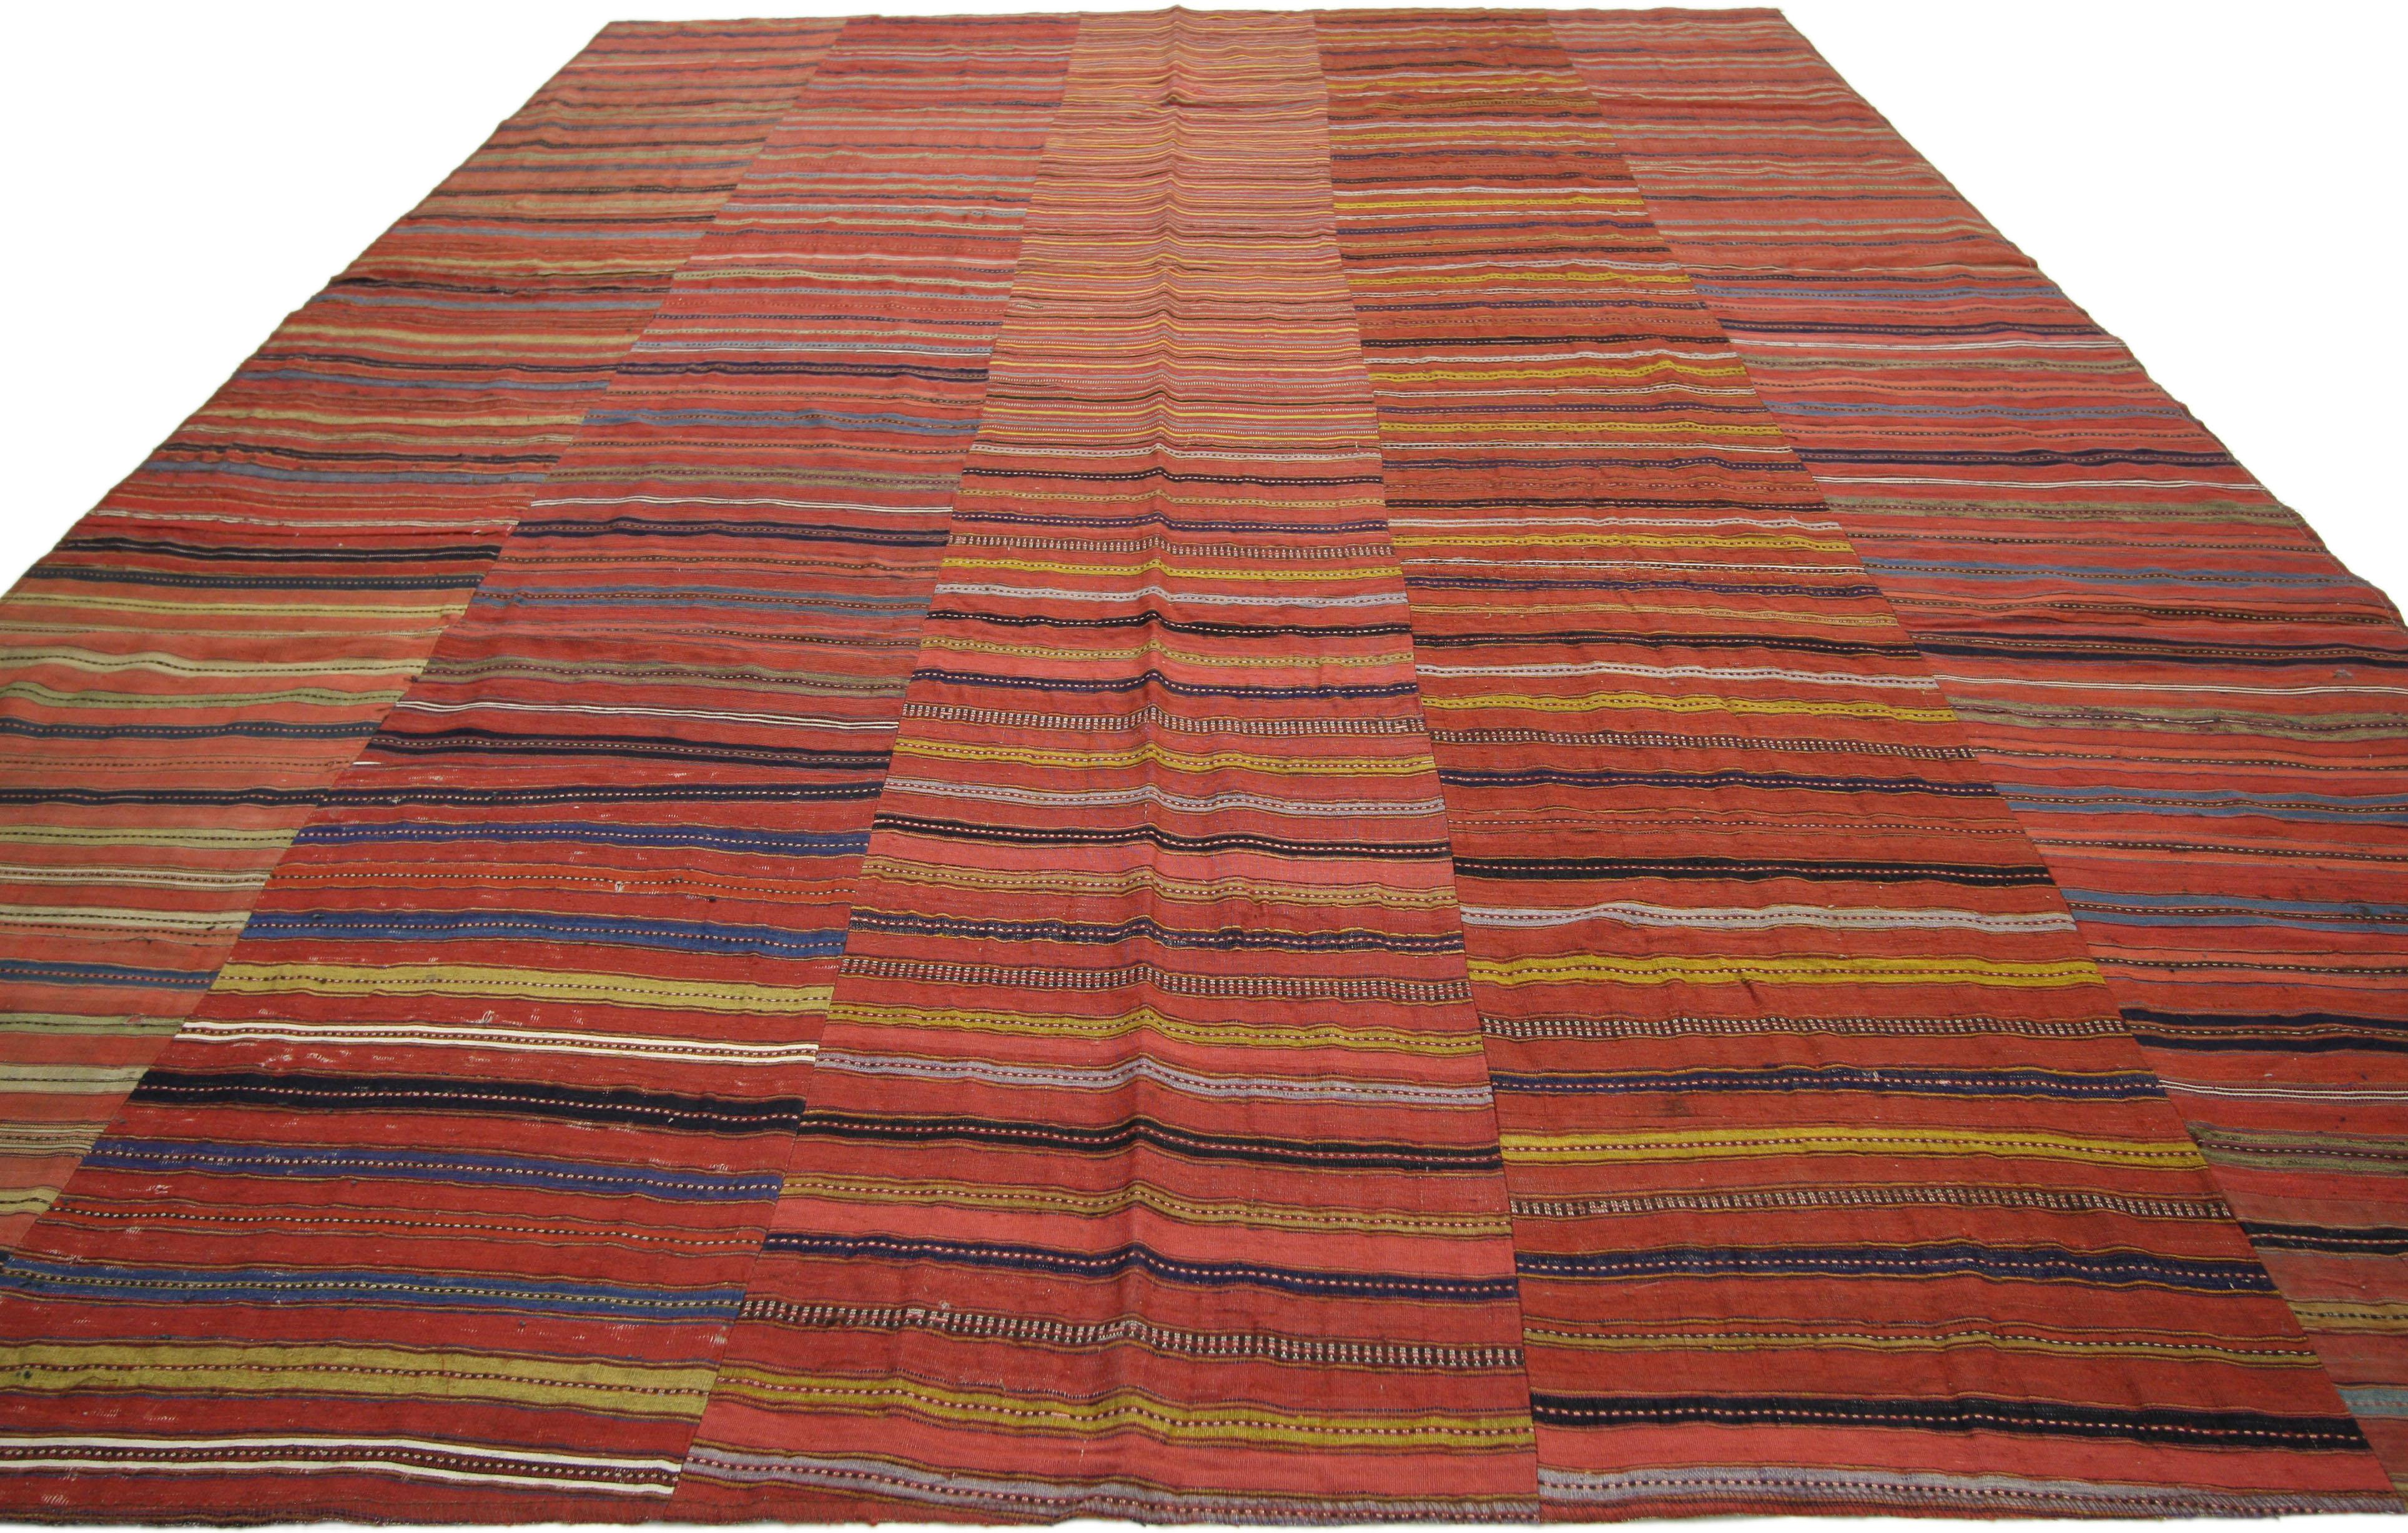 Hand-Woven Distressed Vintage Turkish Kilim Rug with Bayadere Stripes and Rustic Style